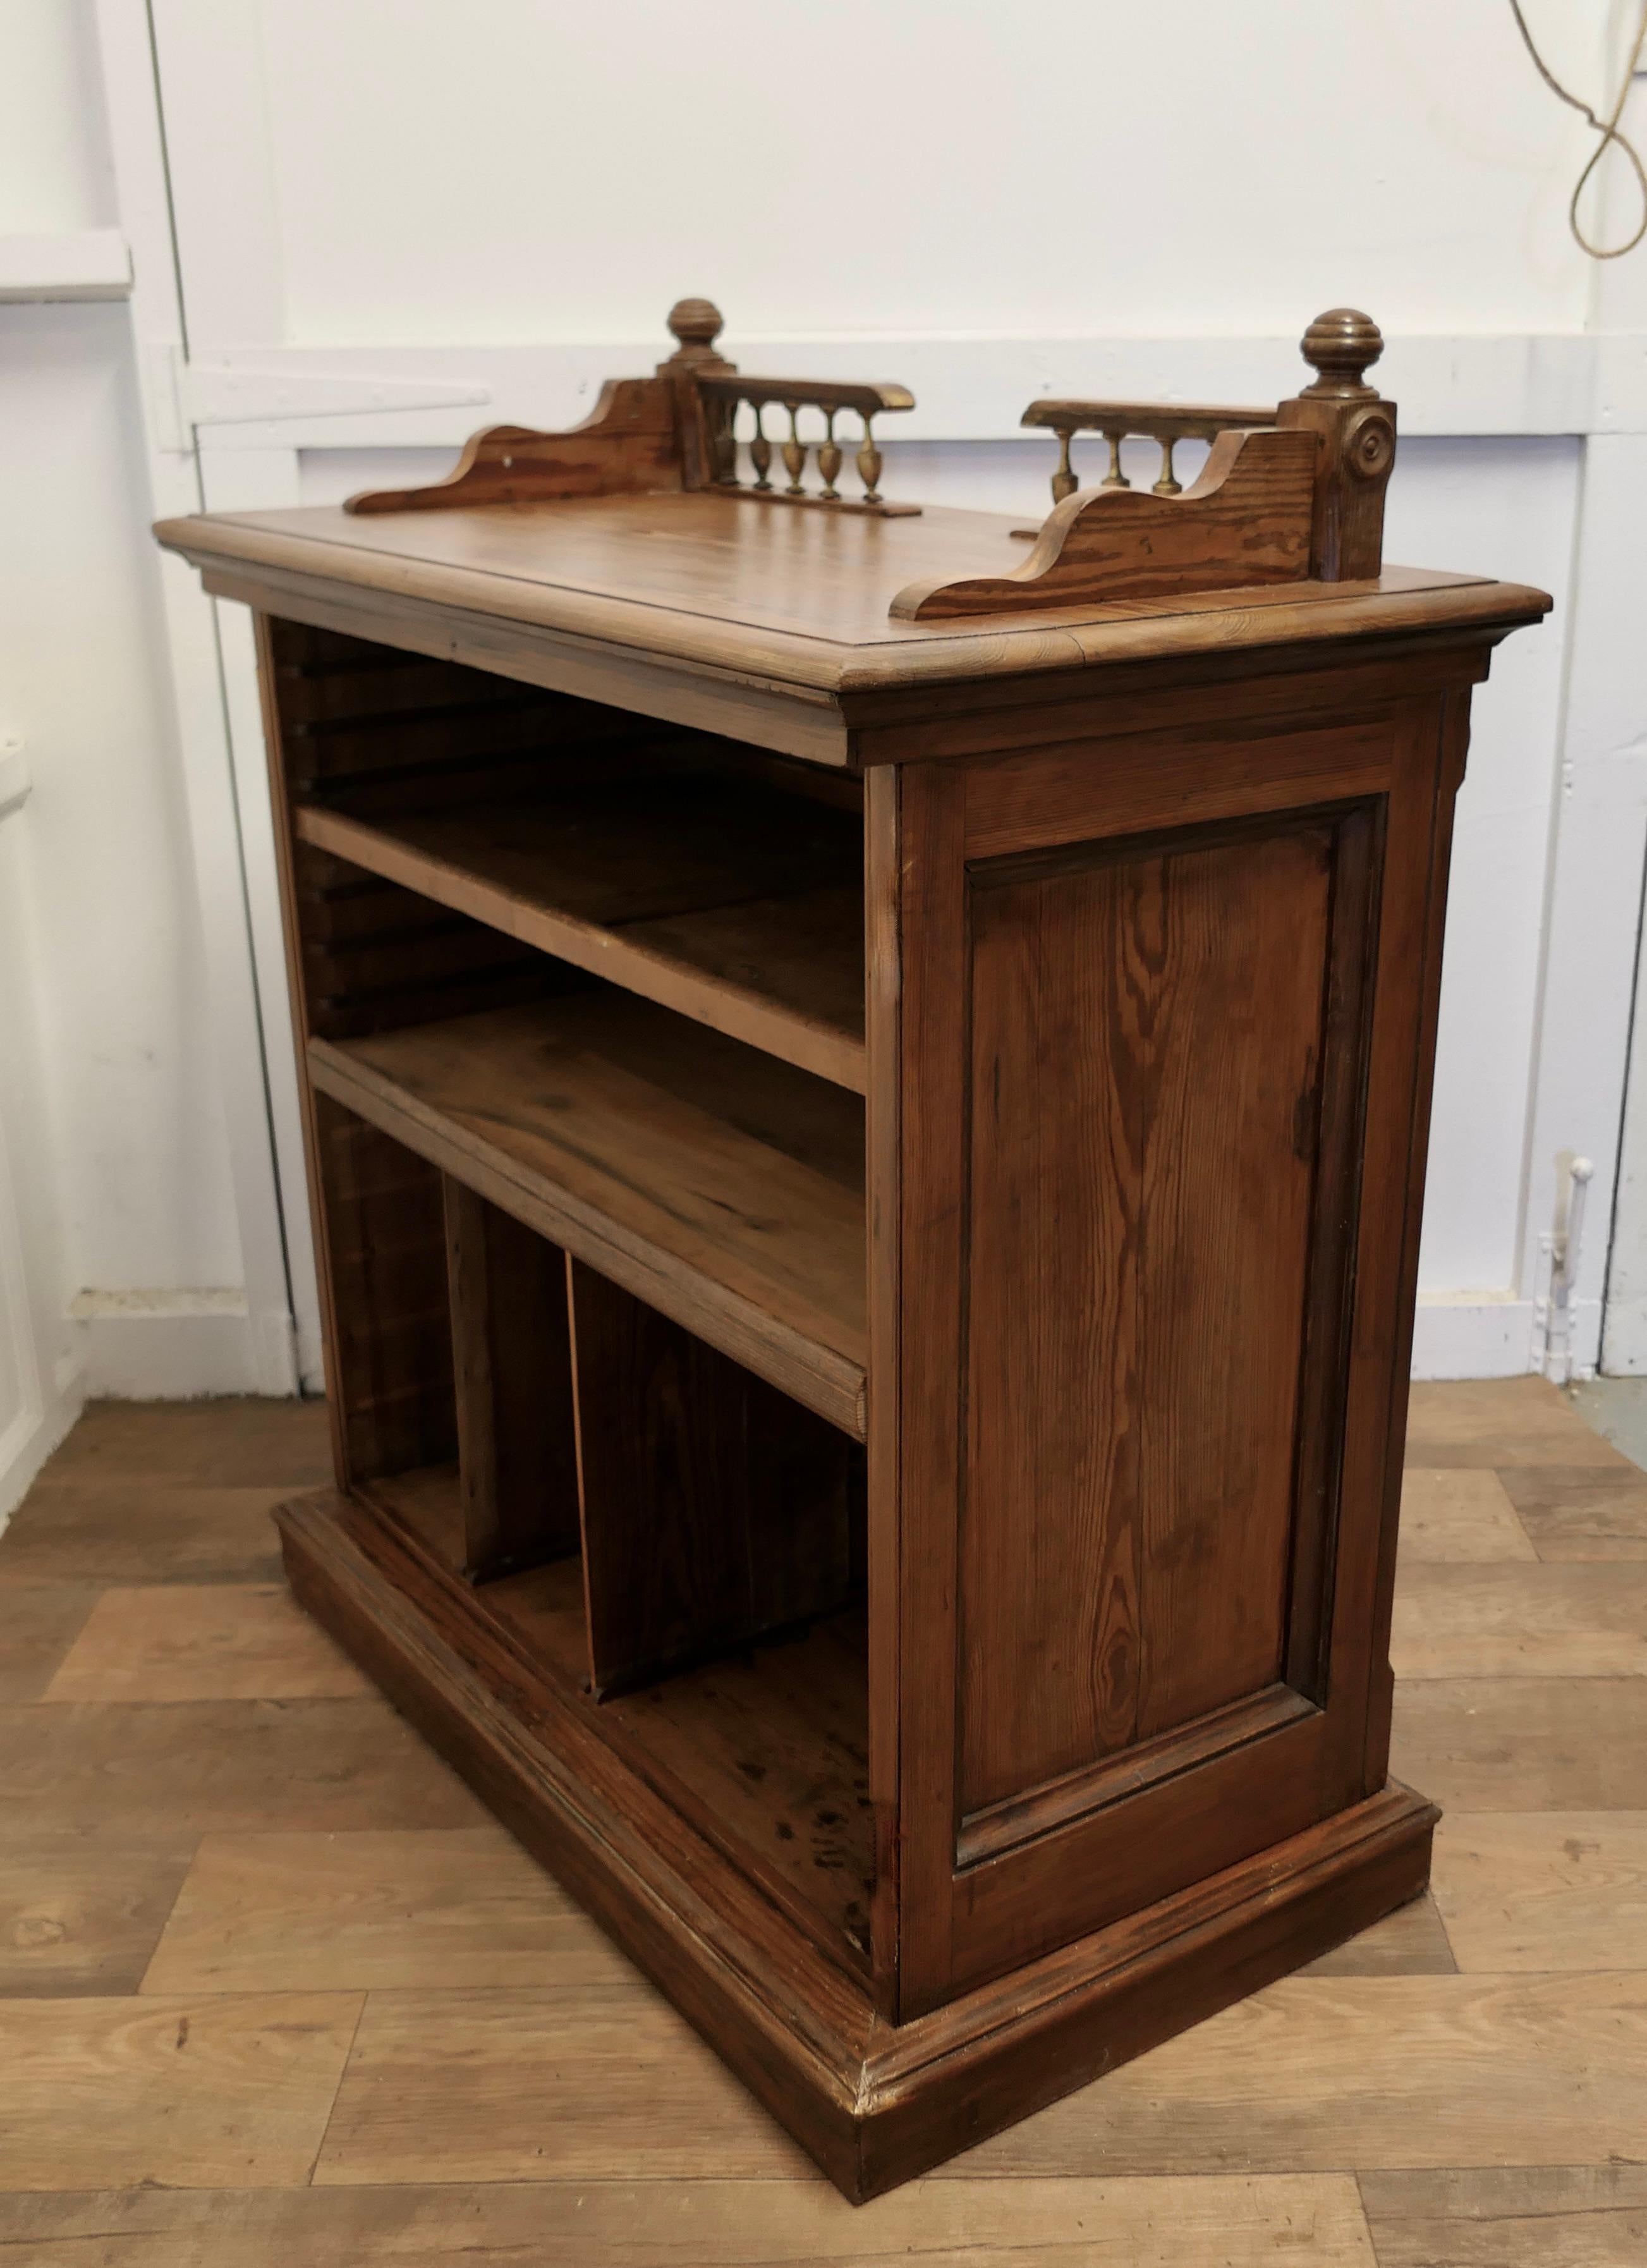 Late 19th Century Pitch Pine Hotel Restaurant Reception Hostess Greeting Station  For Sale